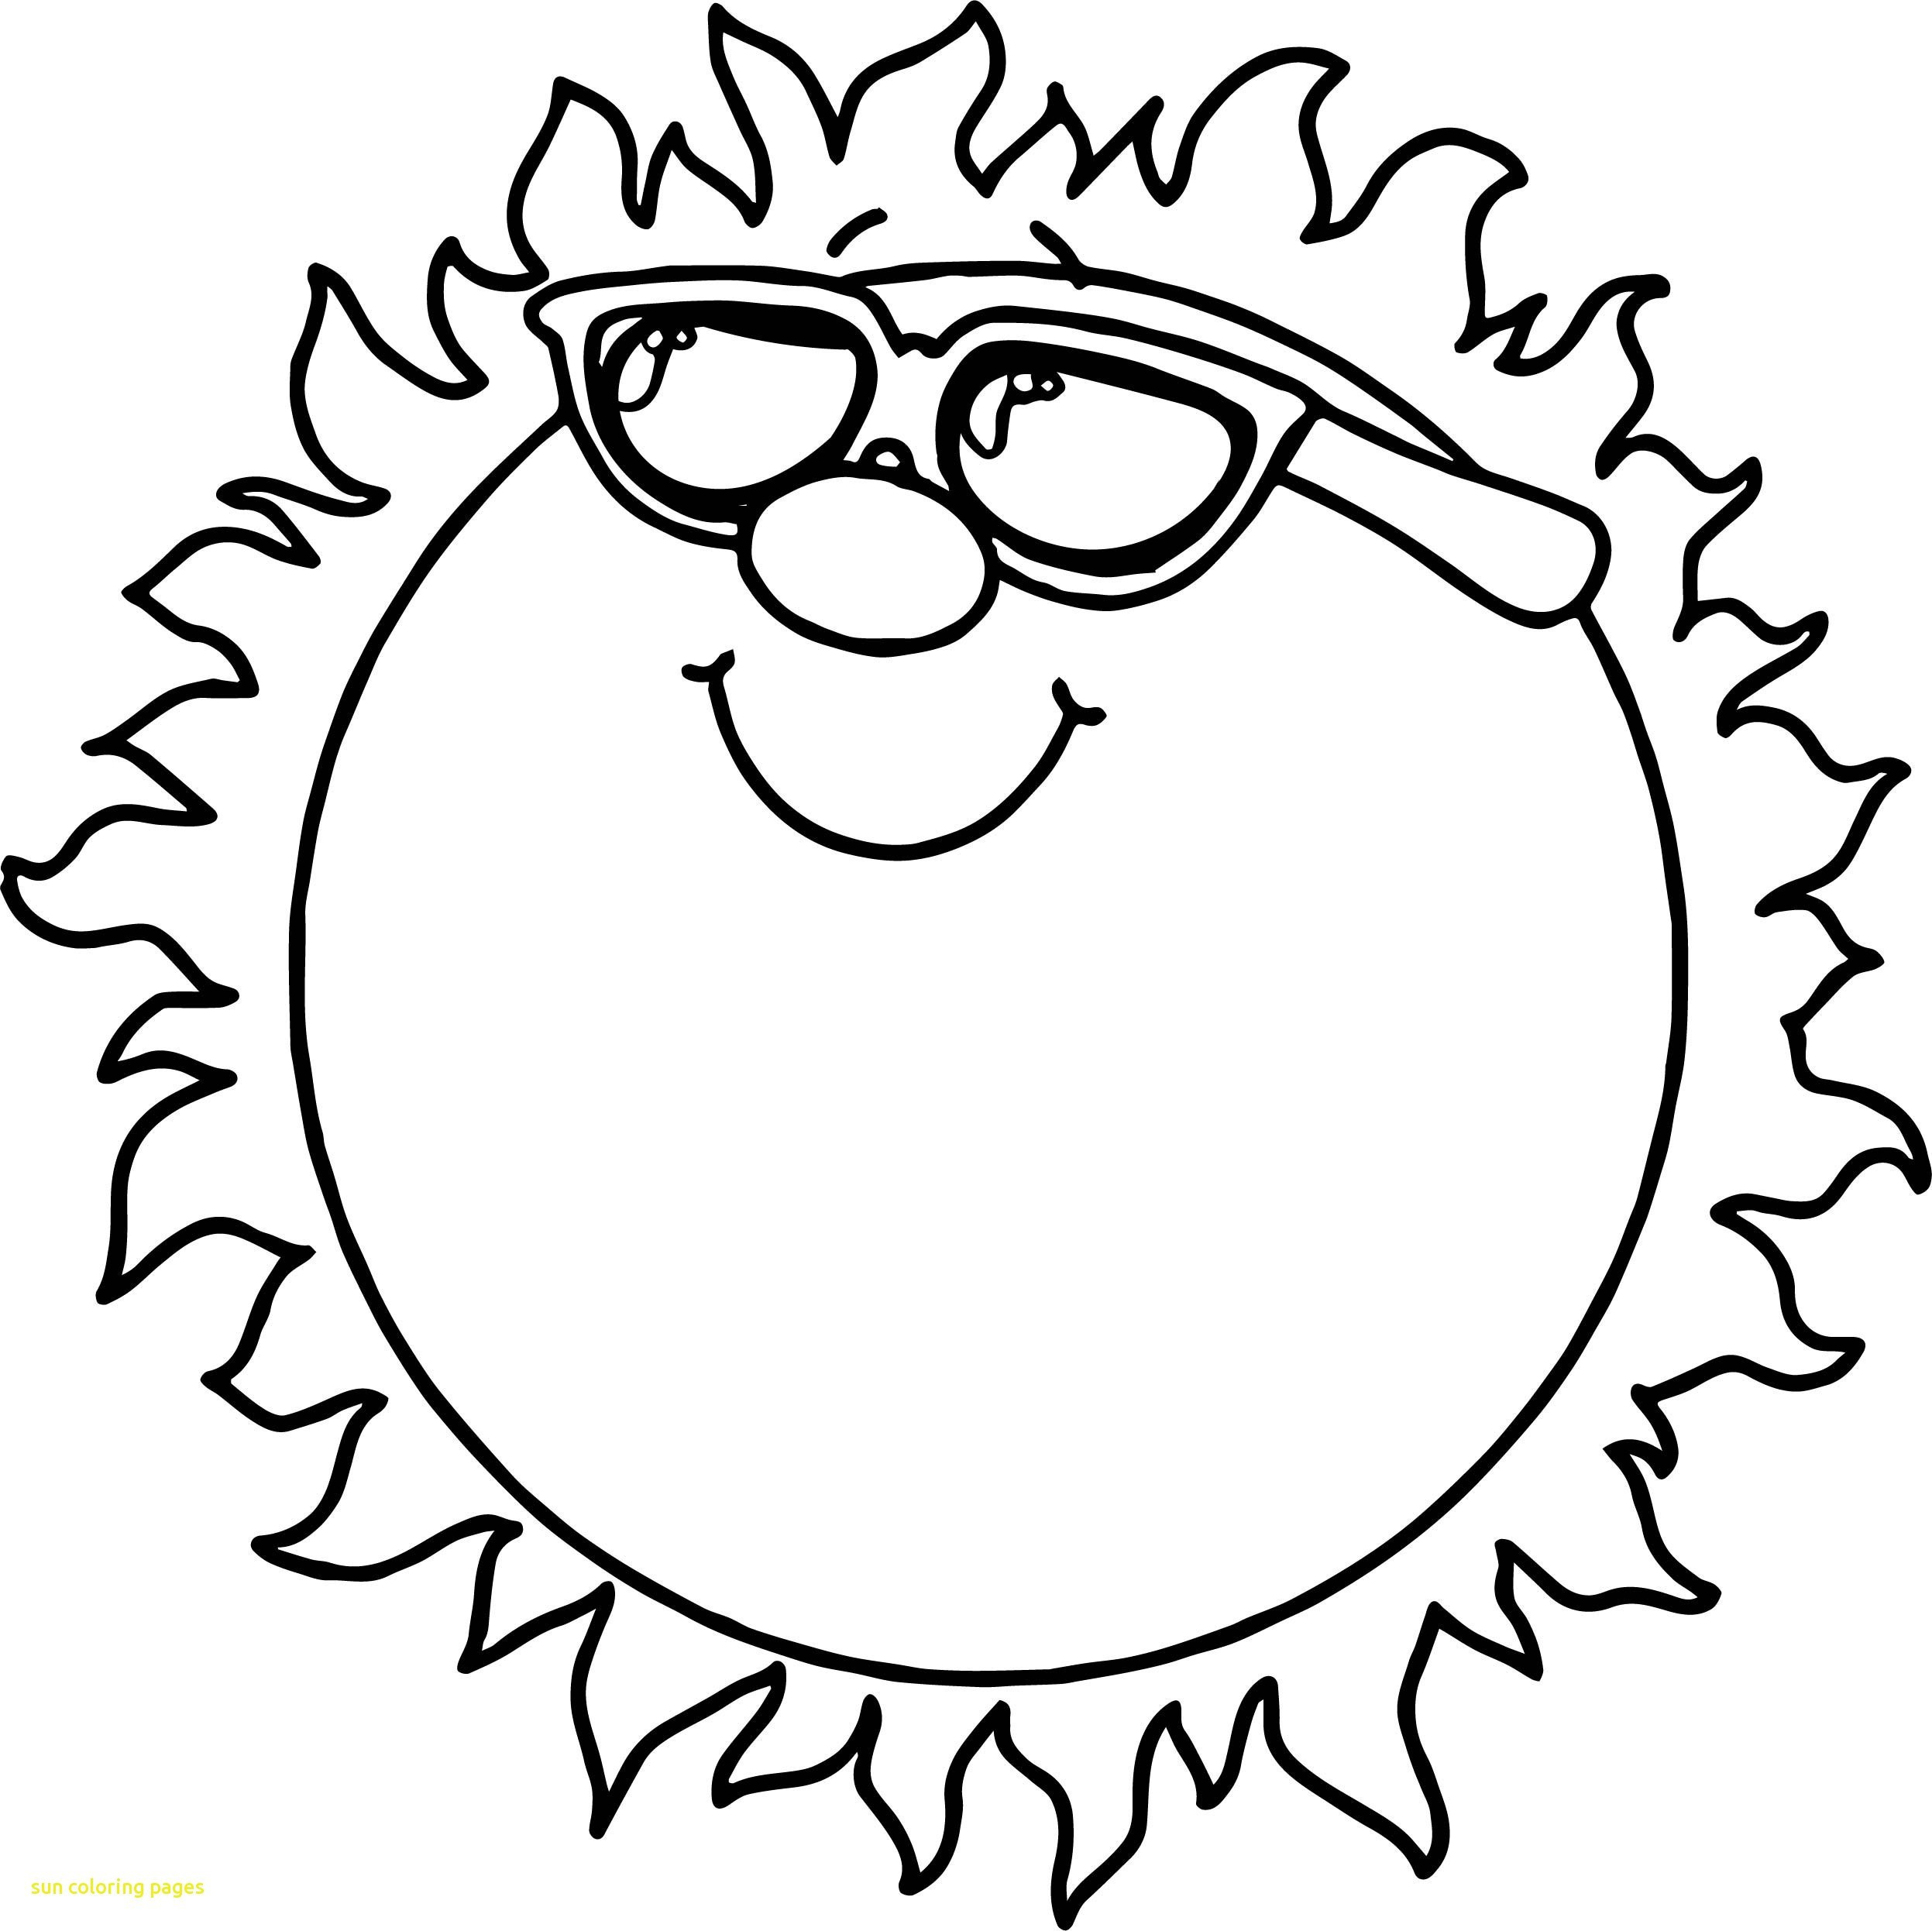 Coloring Pages Sun Sun Template Coloring Page New Dog Crafts For Preschool New Drawing